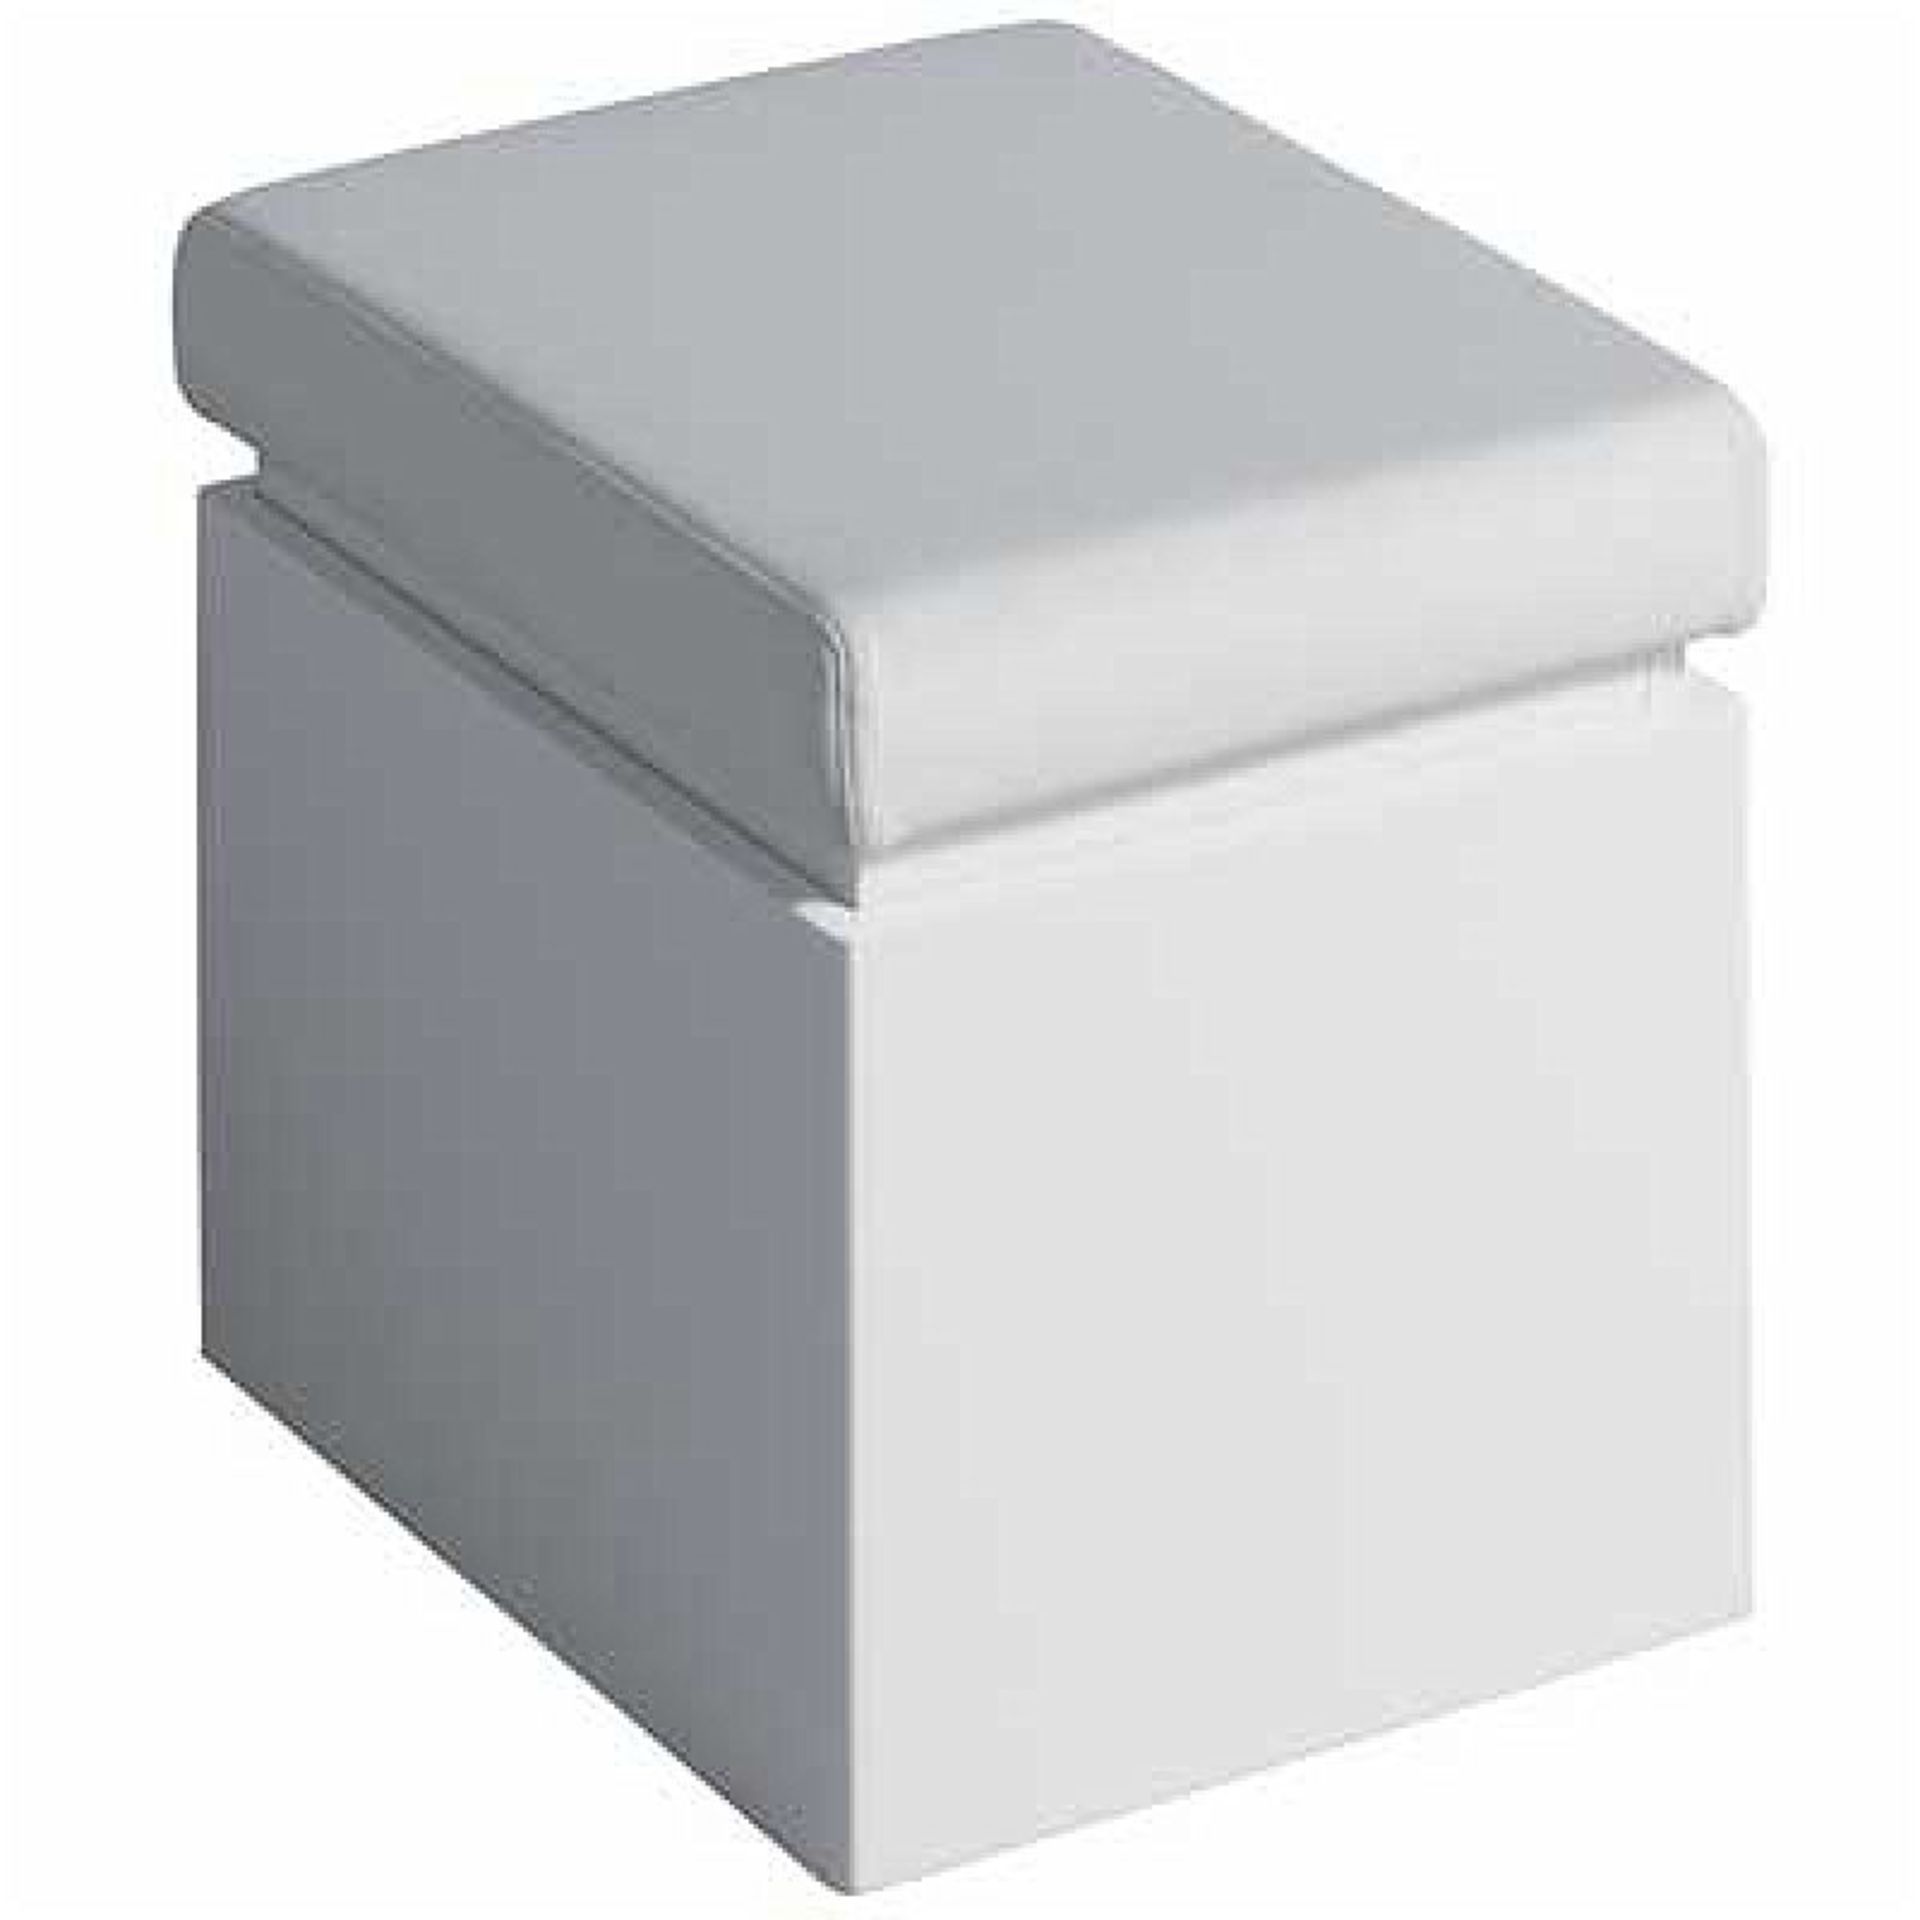 NEW Twyford White Bathroom Seat With Storage. RRP £254.99.TA0901WH. The Twyford White Ba... - Image 2 of 2